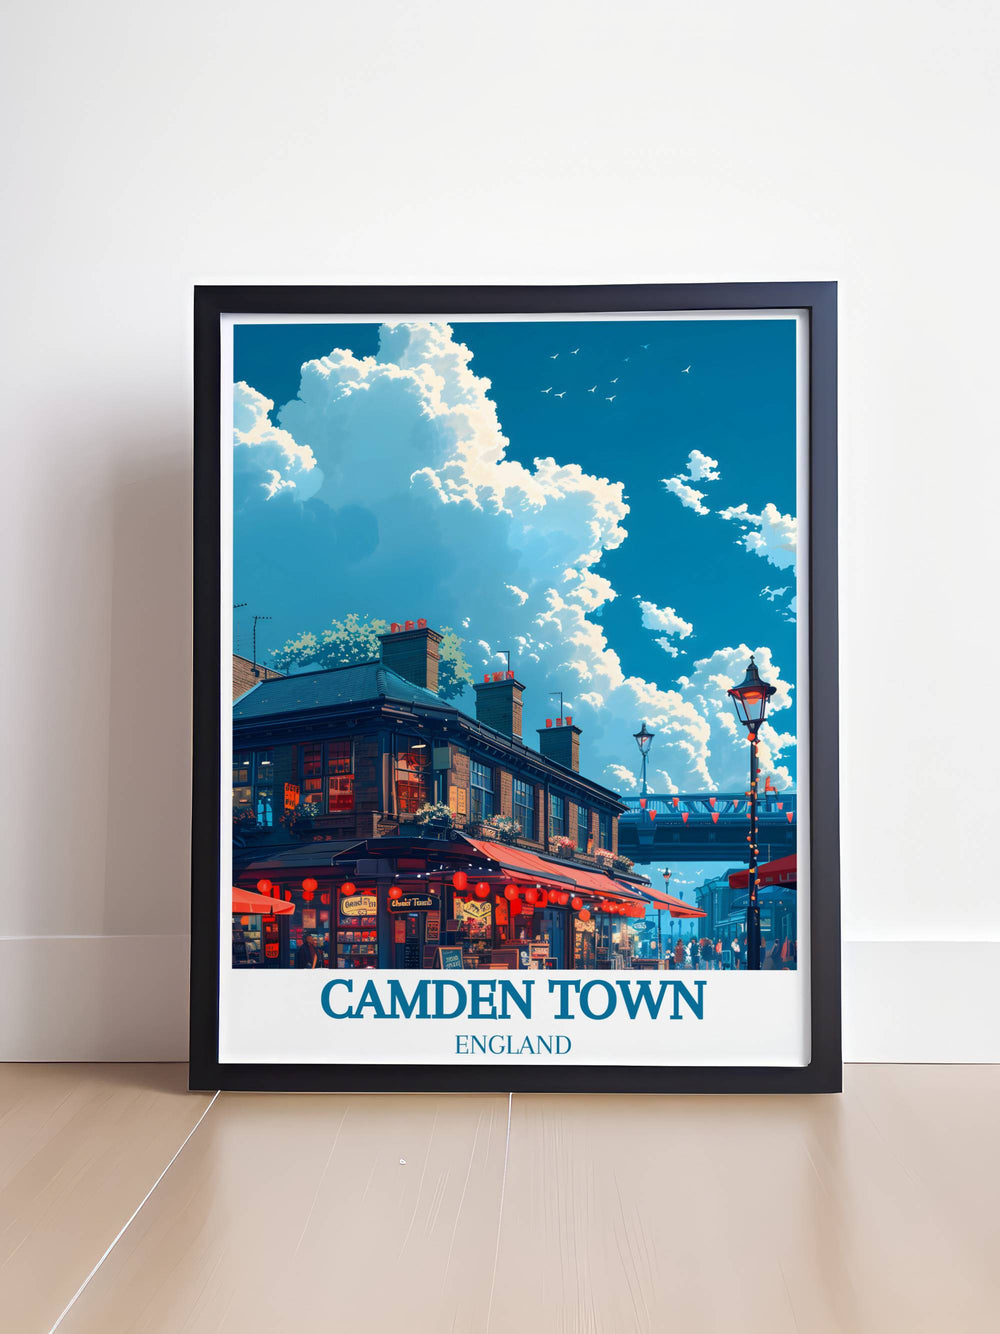 Stunning Camden Market artwork featuring a detailed depiction of the bustling Camden Market and serene views from Primrose Hill an ideal piece for those who appreciate the charm of vintage travel prints and want to bring the spirit of London into their space.